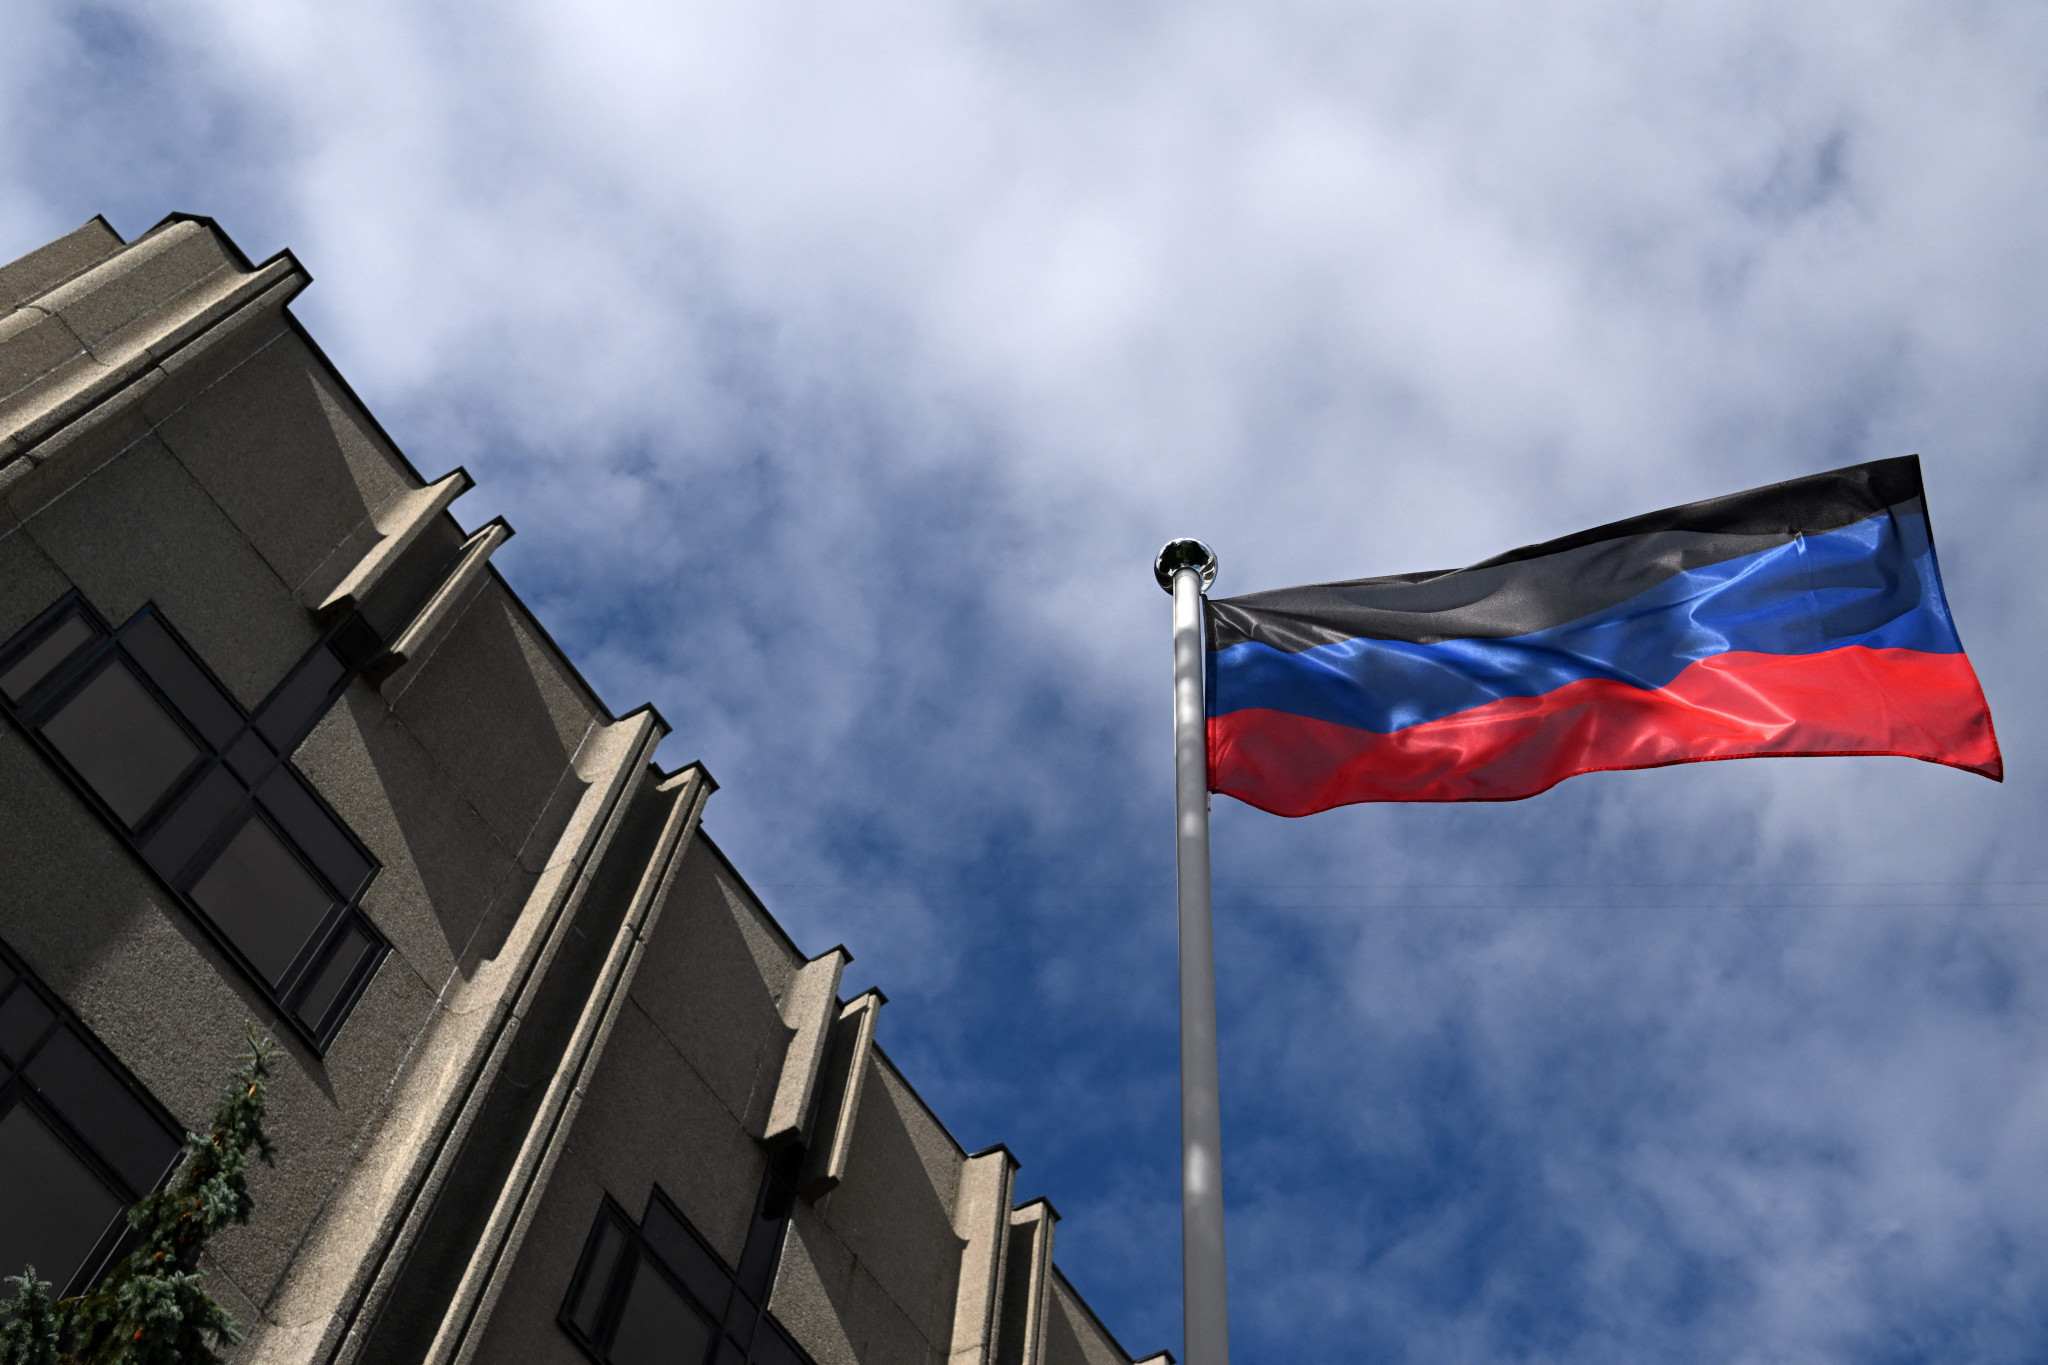 The flag of the self-proclaimed Donetsk People's Republic, the eastern Ukrainian annexed region, flies in the wind in front of its embassy ©Getty Images